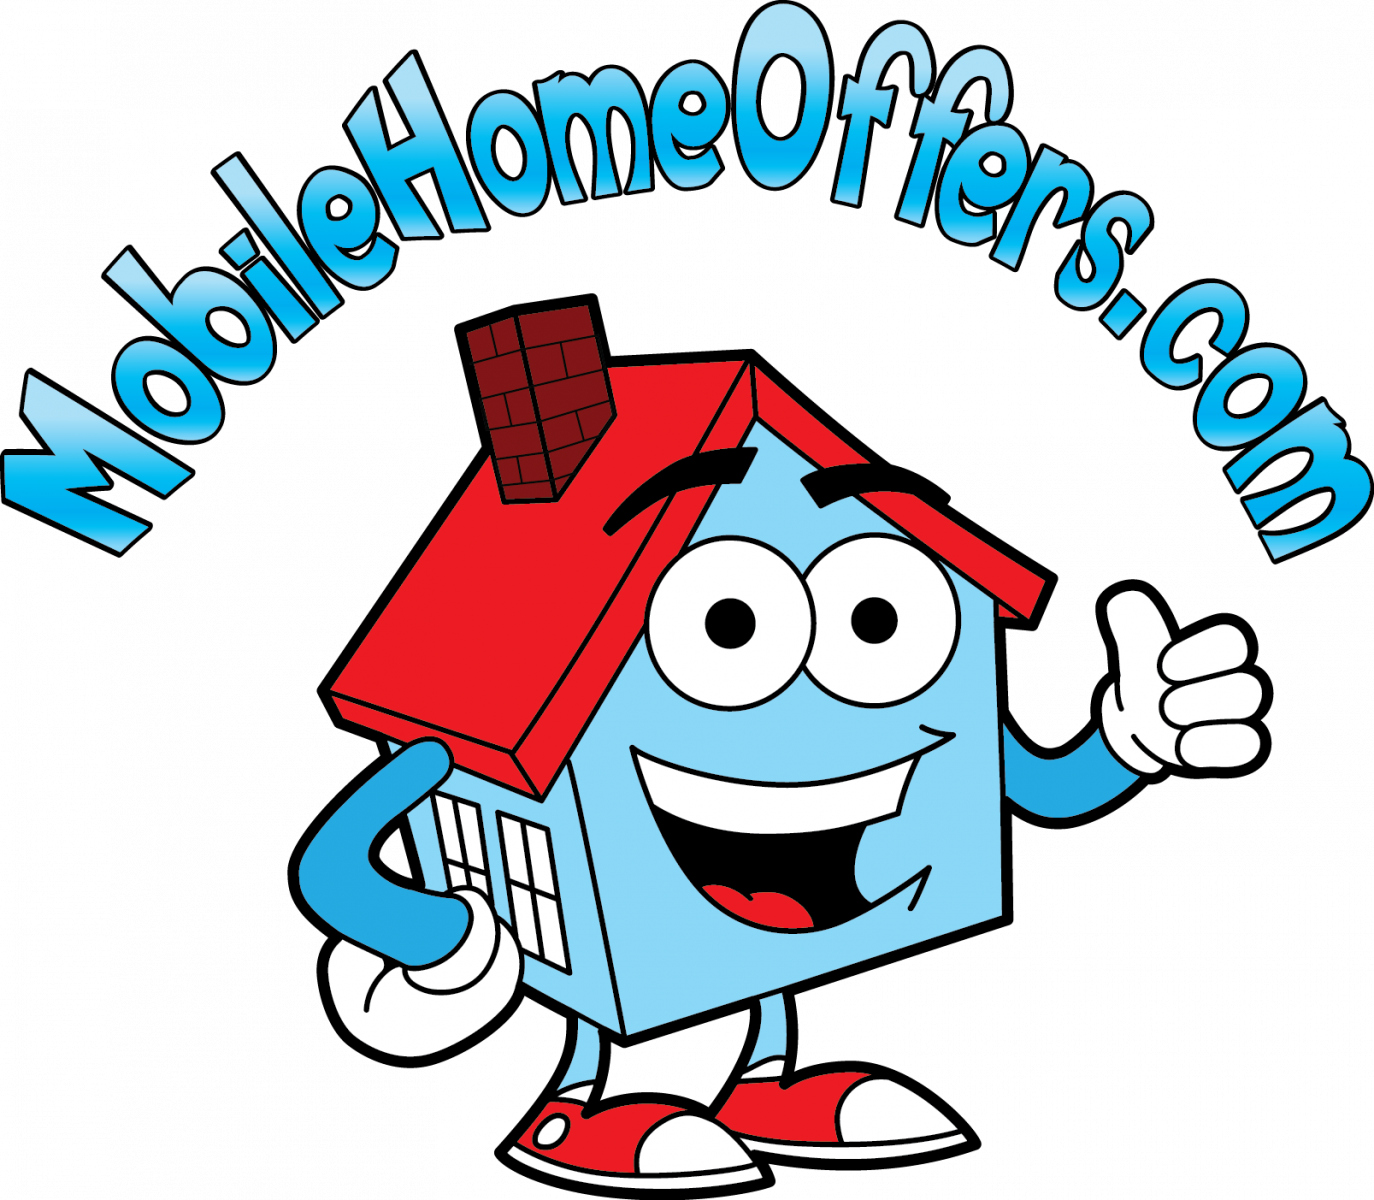 Mobile Home Offers logo